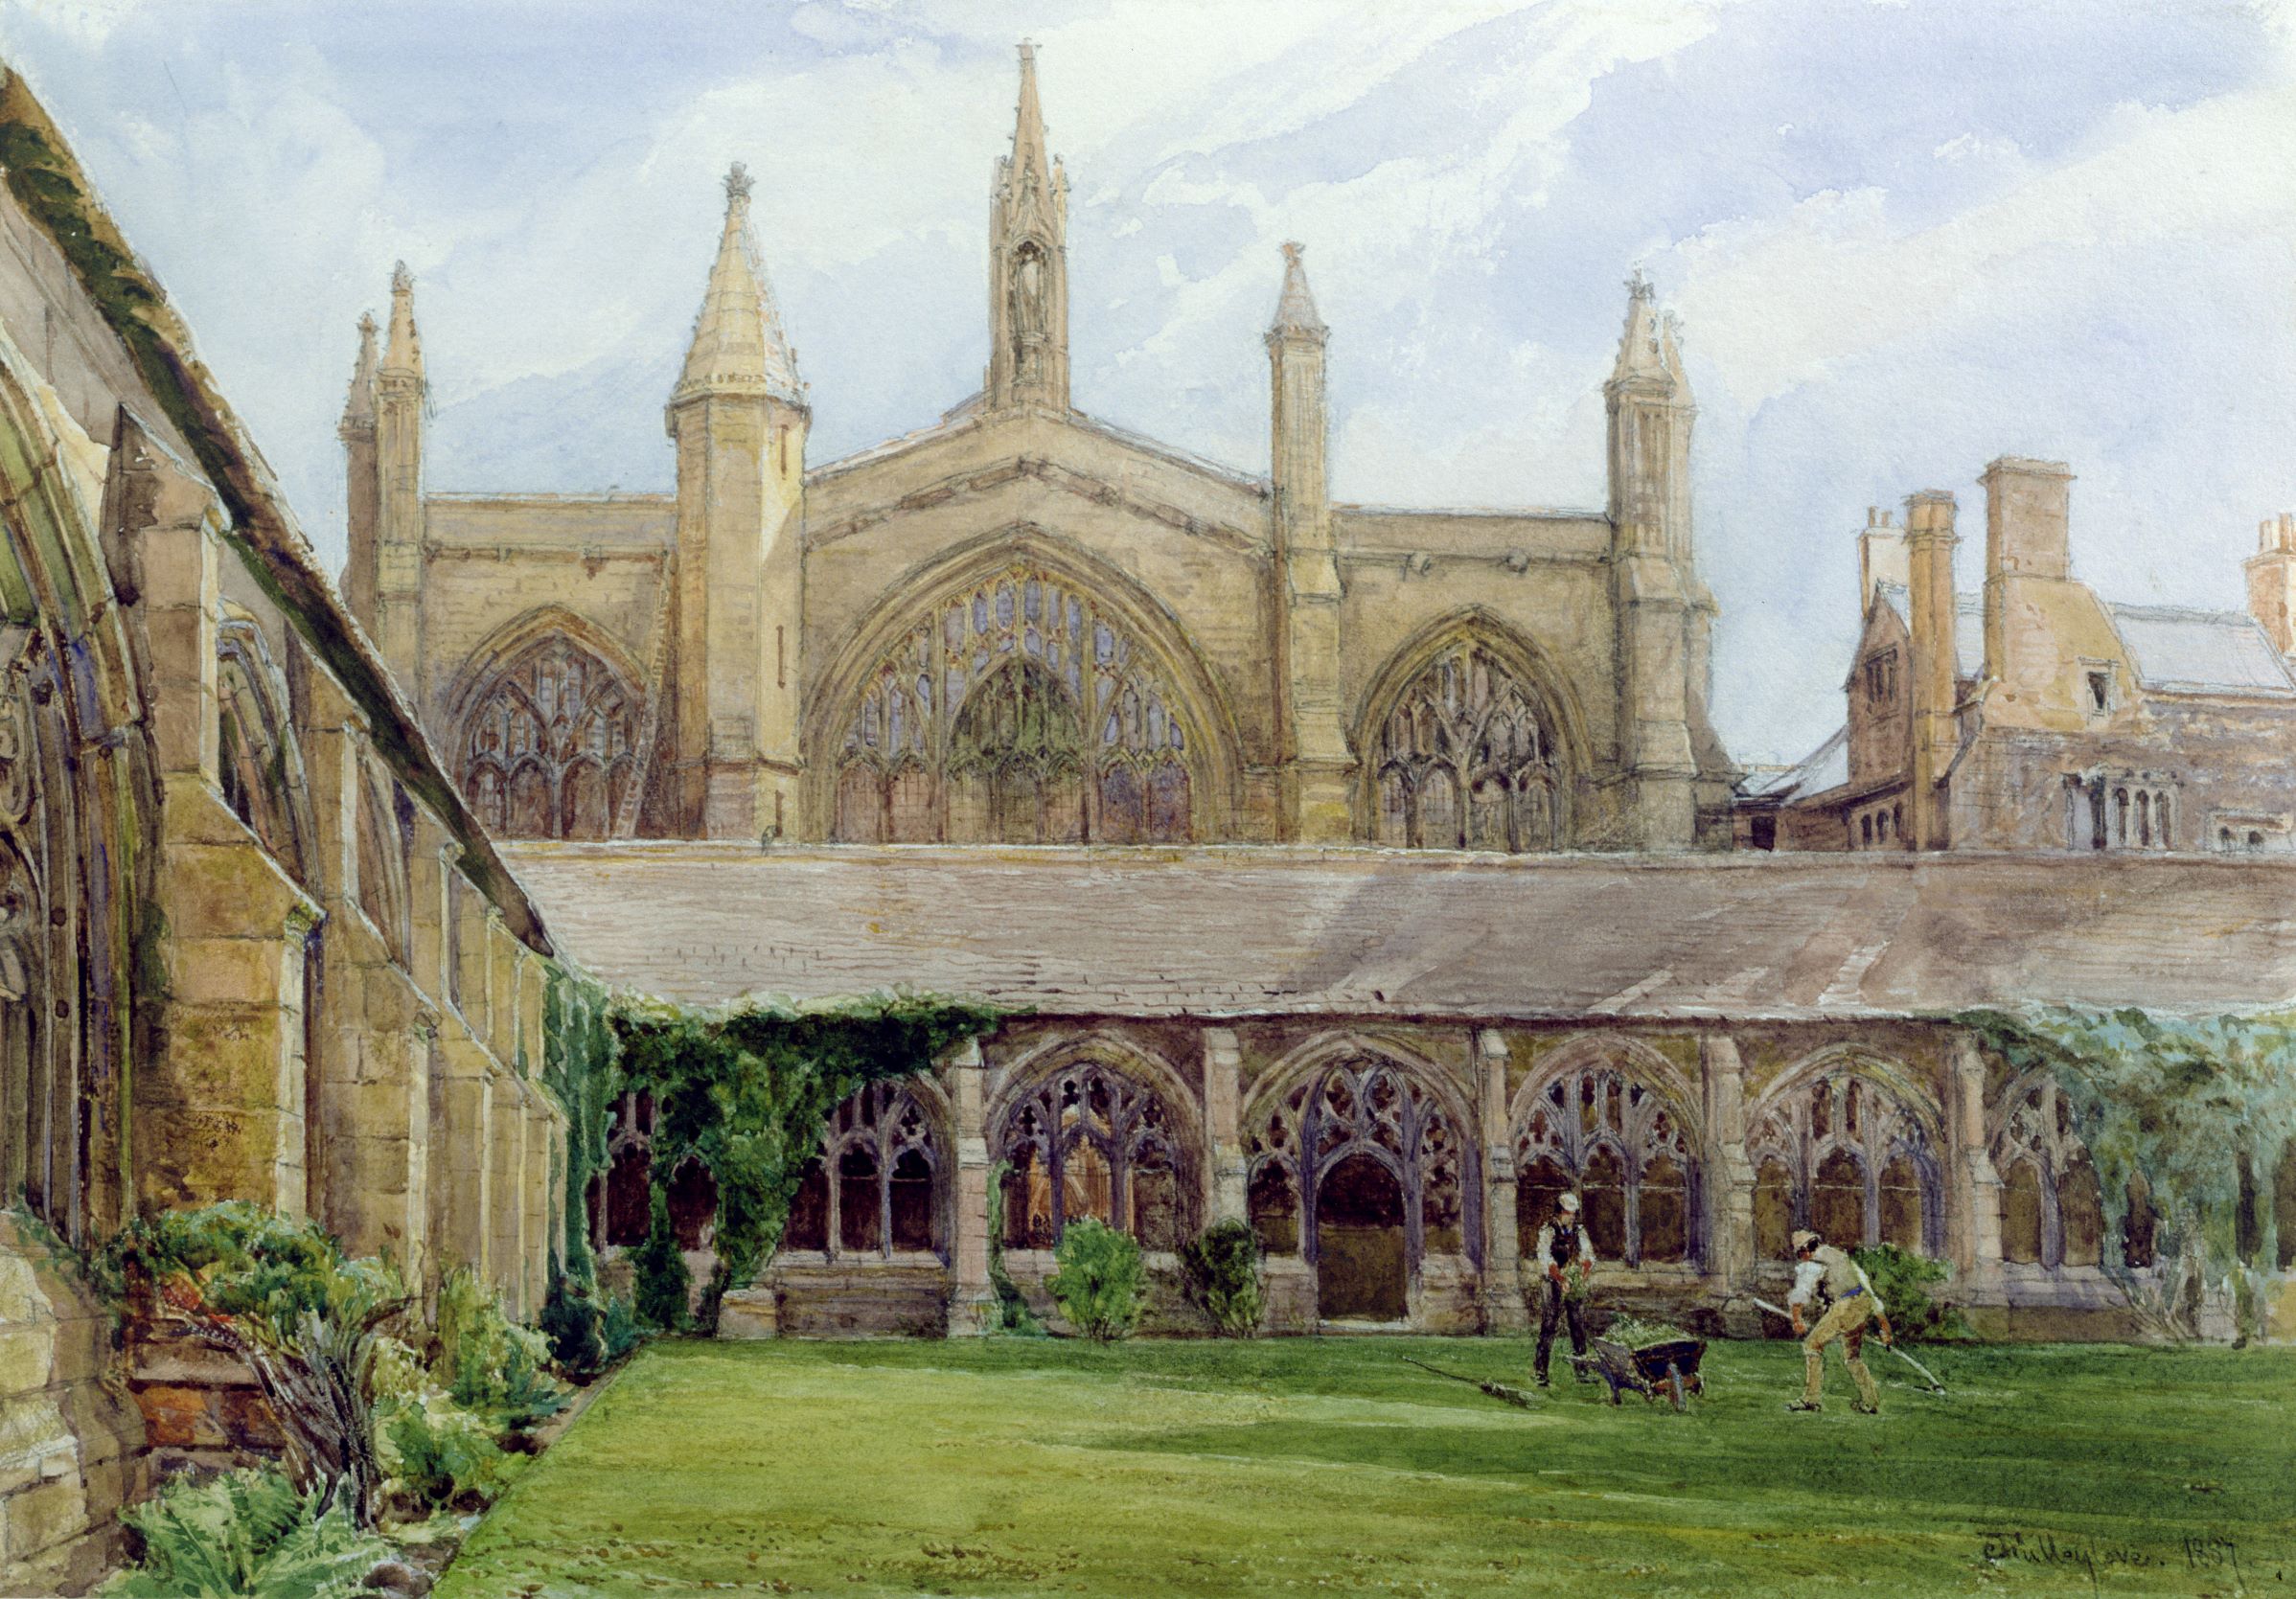 New College Cloisters with Gardeners; artist: John Fulleylove; medium: Pencil & Watercolour; date: 1887.